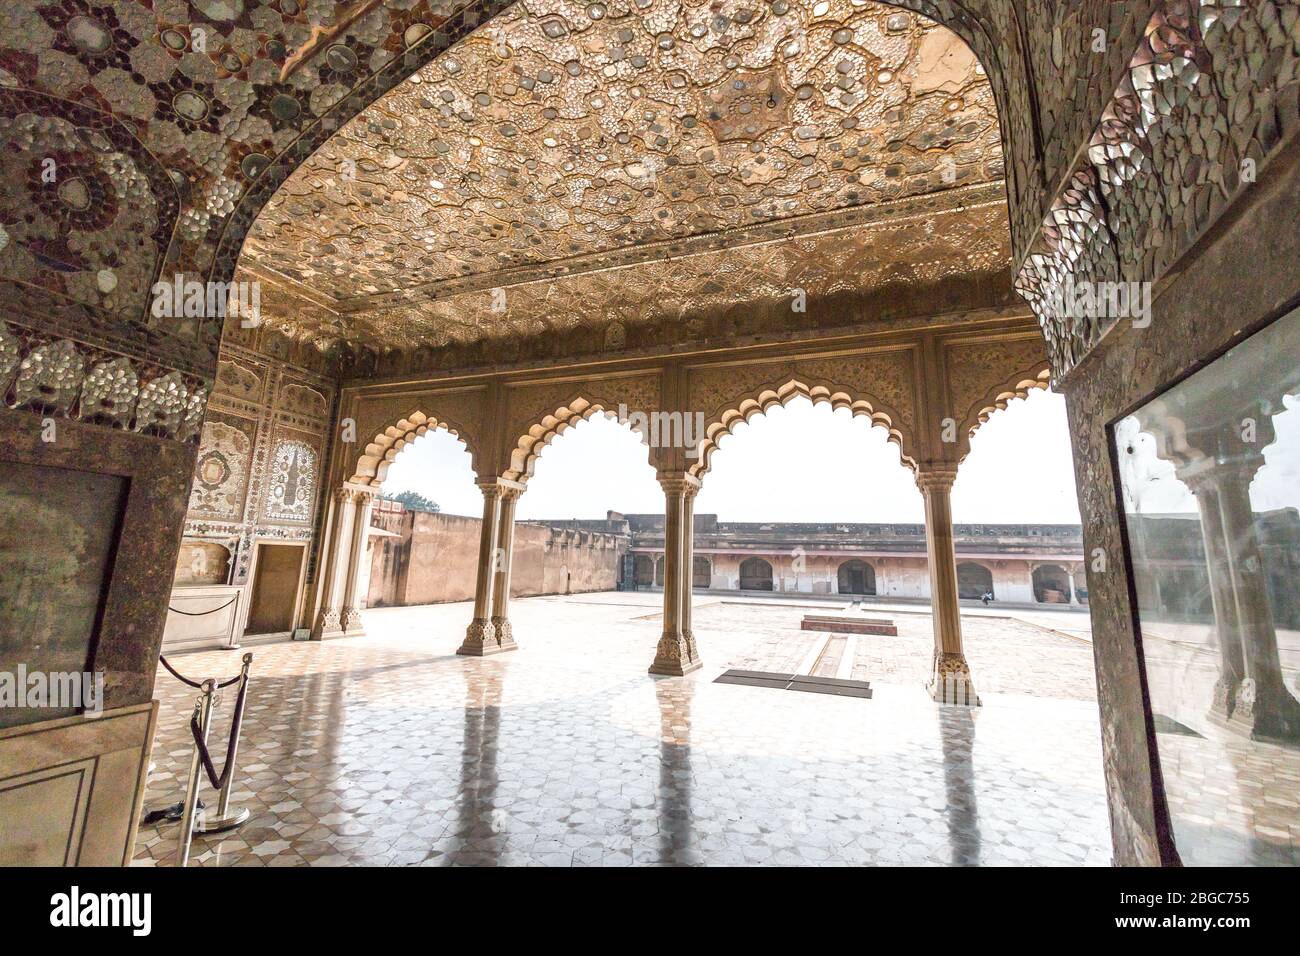 Sheesh Mahal (Palace of Mirrors), an ornately decorated palace in Lahore, Pakistan and a UNESCO World Heritage Site. Stock Photo